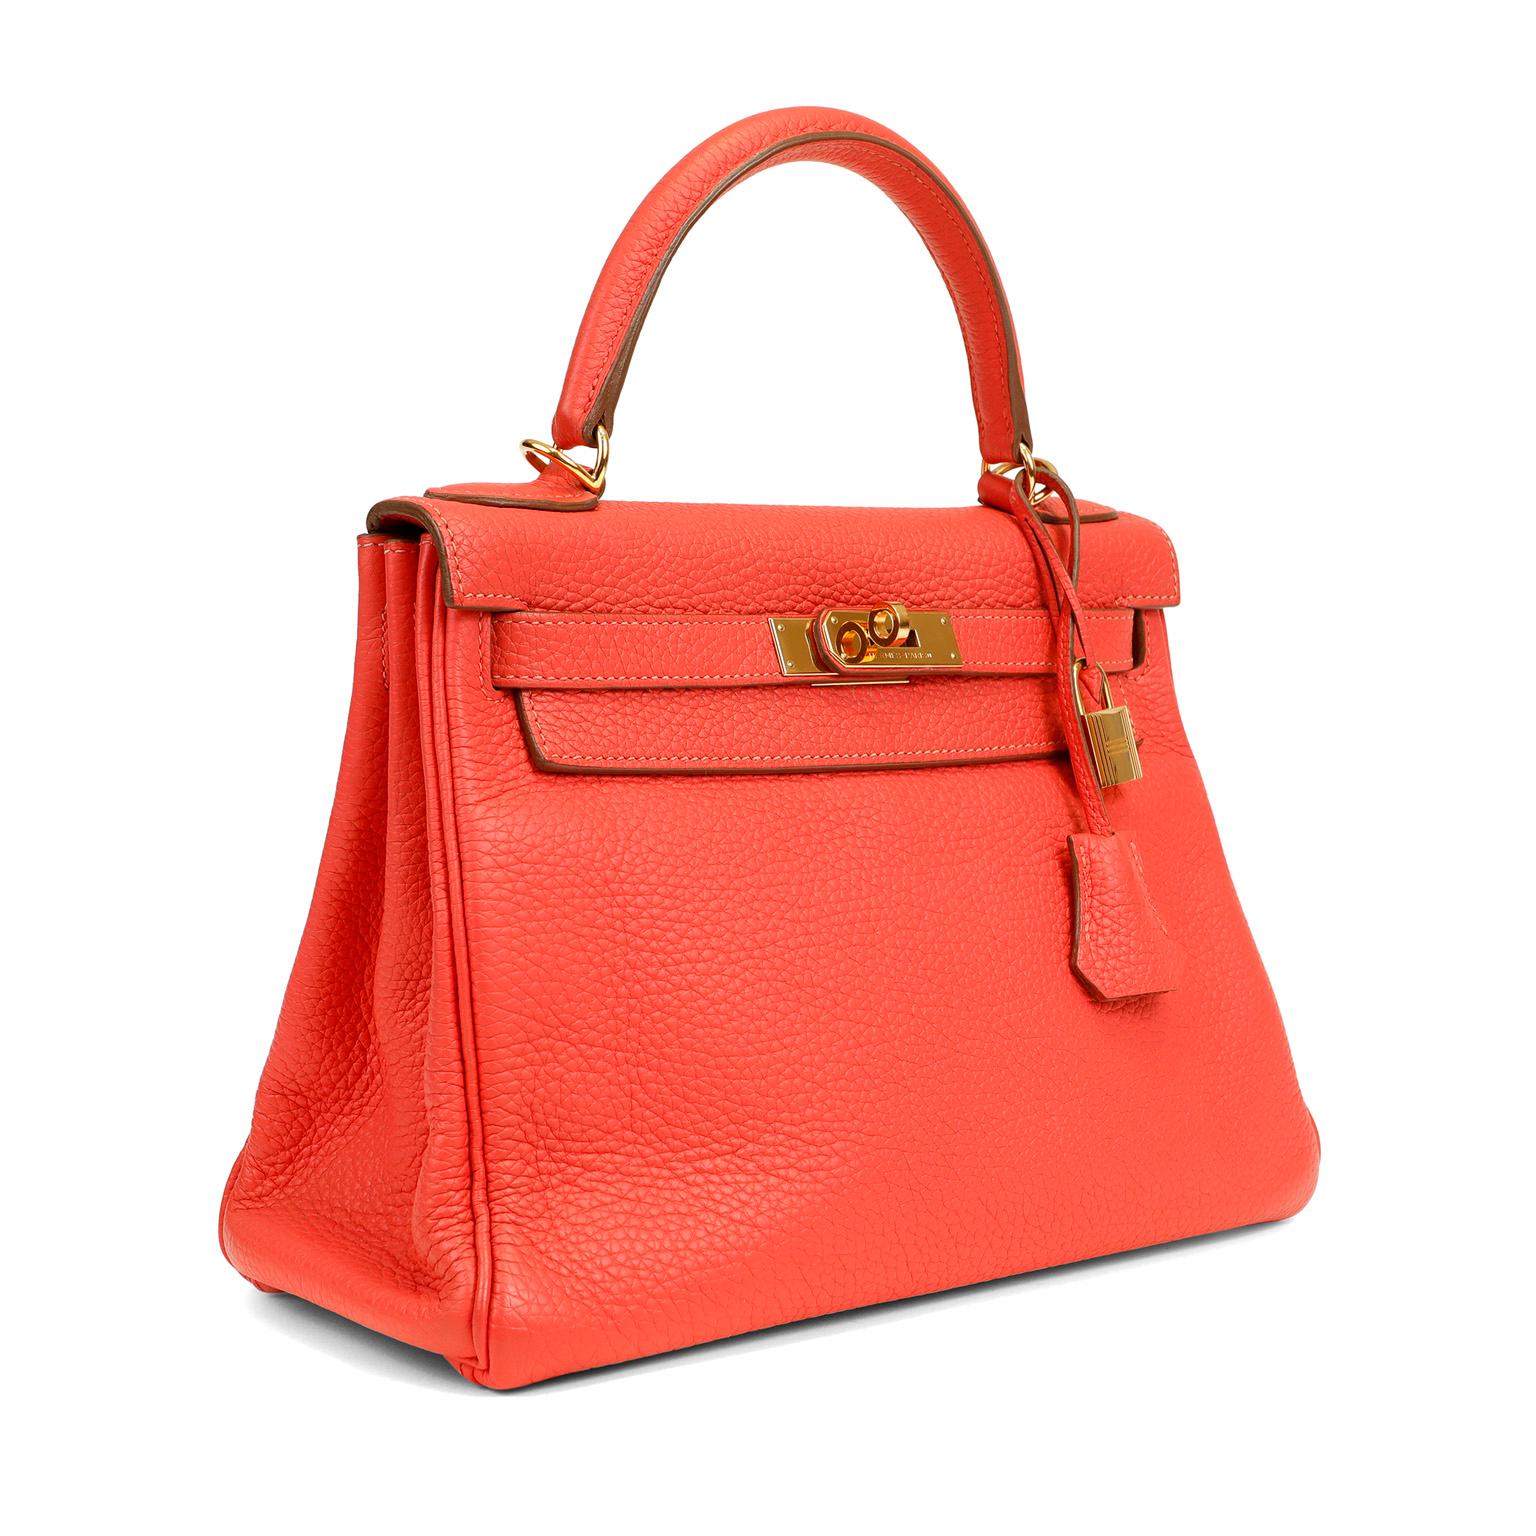 This authentic Hermès Red Togo Leather 28 cm Kelly Bag is in good previously owned condition.    Hermès bags are considered the ultimate luxury item worldwide.  Each piece is handcrafted with waitlists that frequently exceed a year.  The streamlined